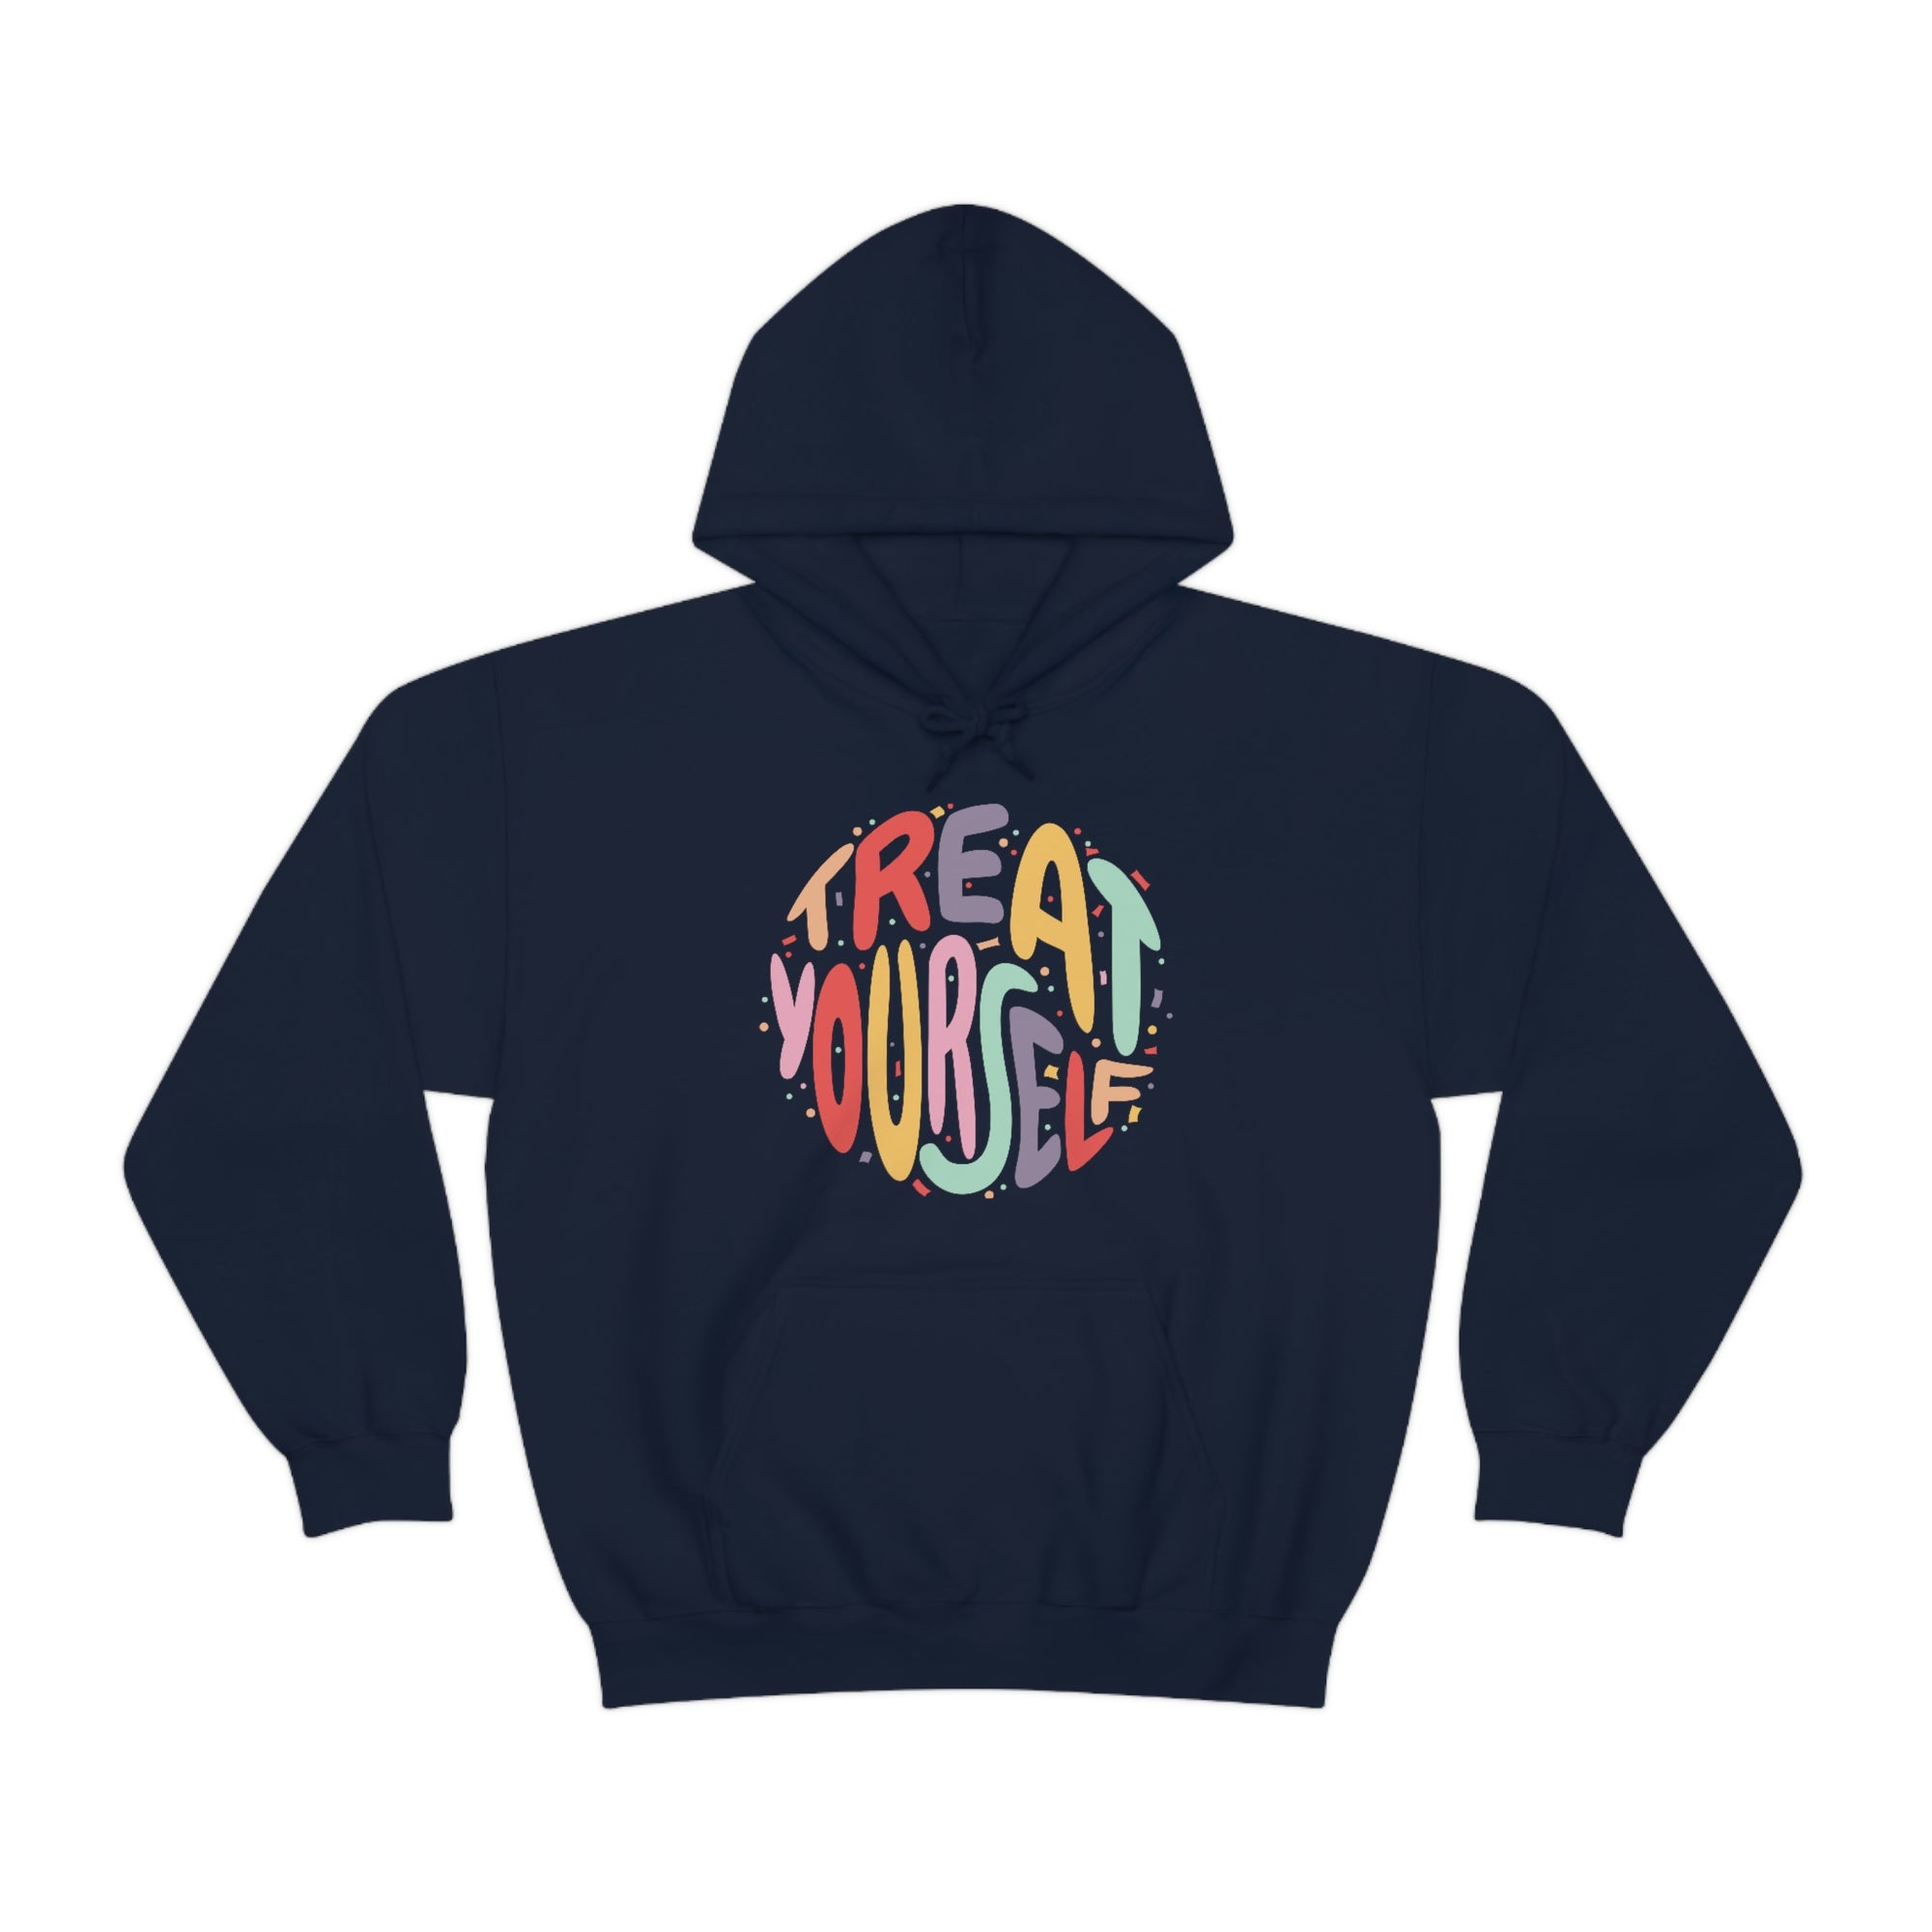 Just Treat Yourself Hoodie